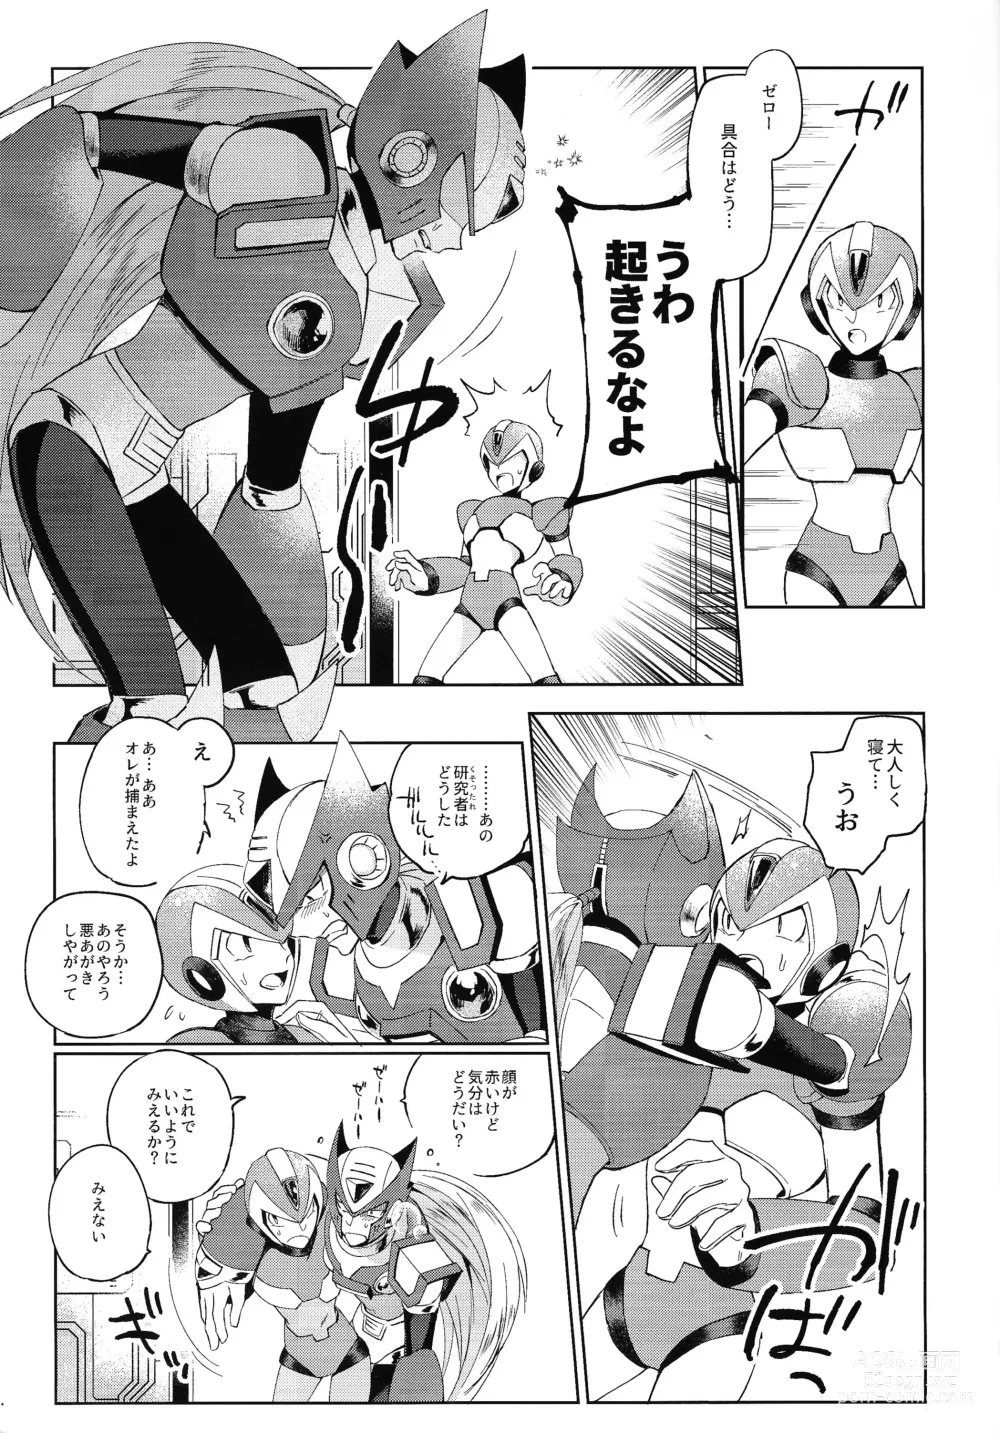 Page 6 of doujinshi HYPER EMERGENCY CALL